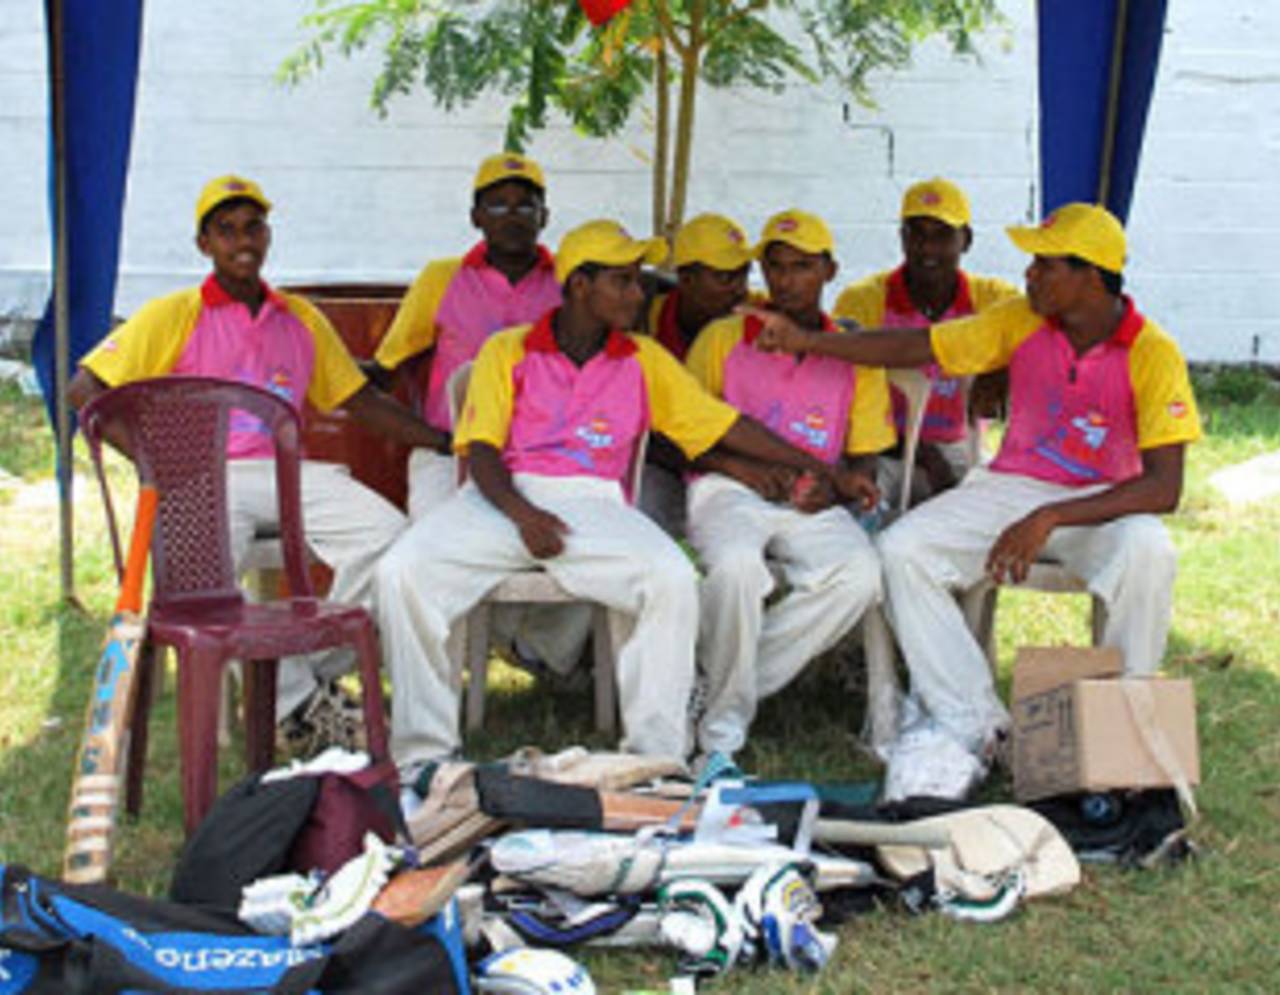 Jaffna players watch the match, Glucofit Cricket Sixes, Colombo, October 17, 2009